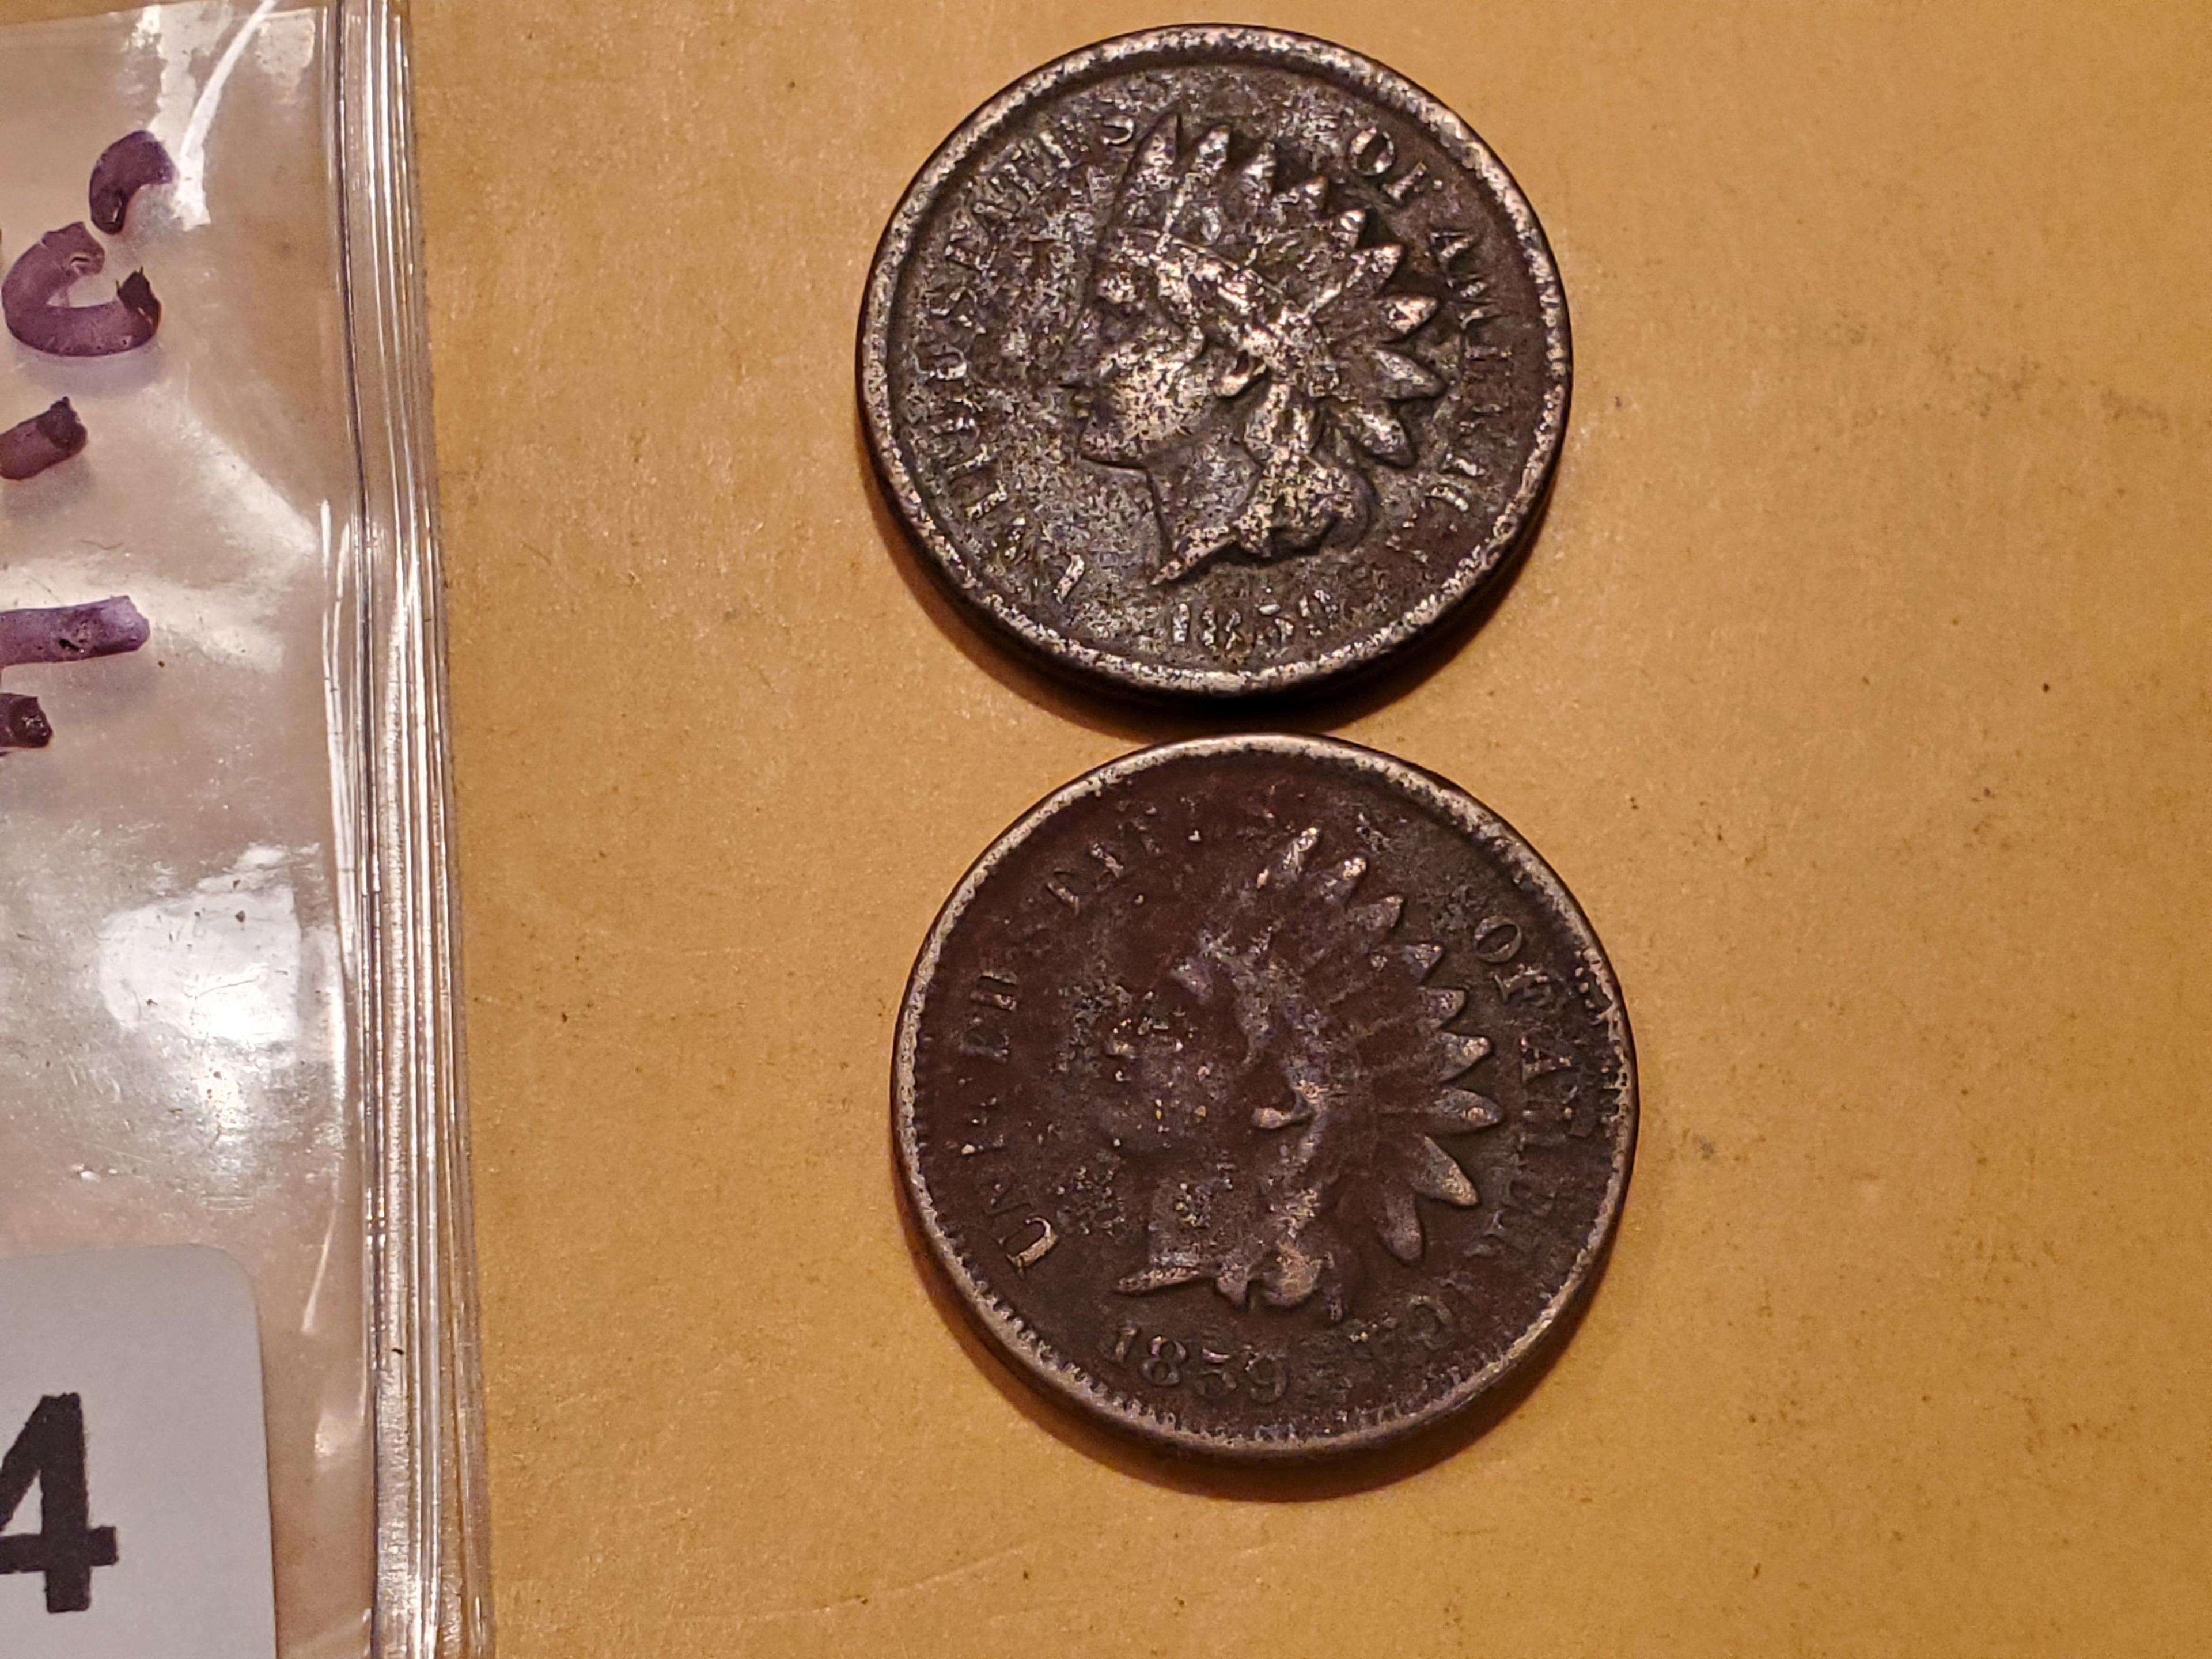 Two 1859 Copper-Nickel Indian cents